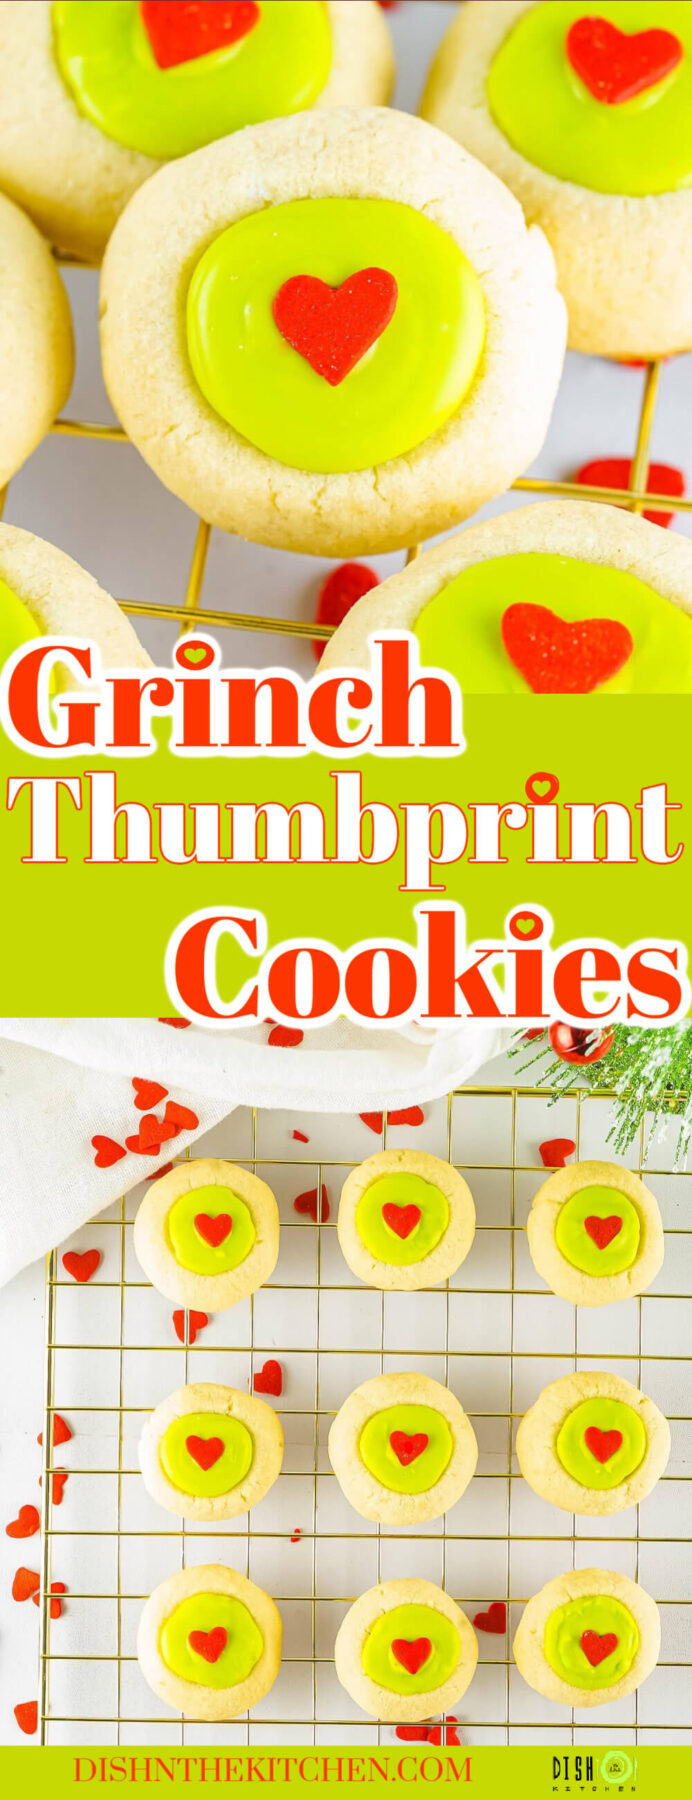 Pinterest image featuring golden baked thumbprint grinch cookies filled with melted green candy melts and decorated with a single red heart.